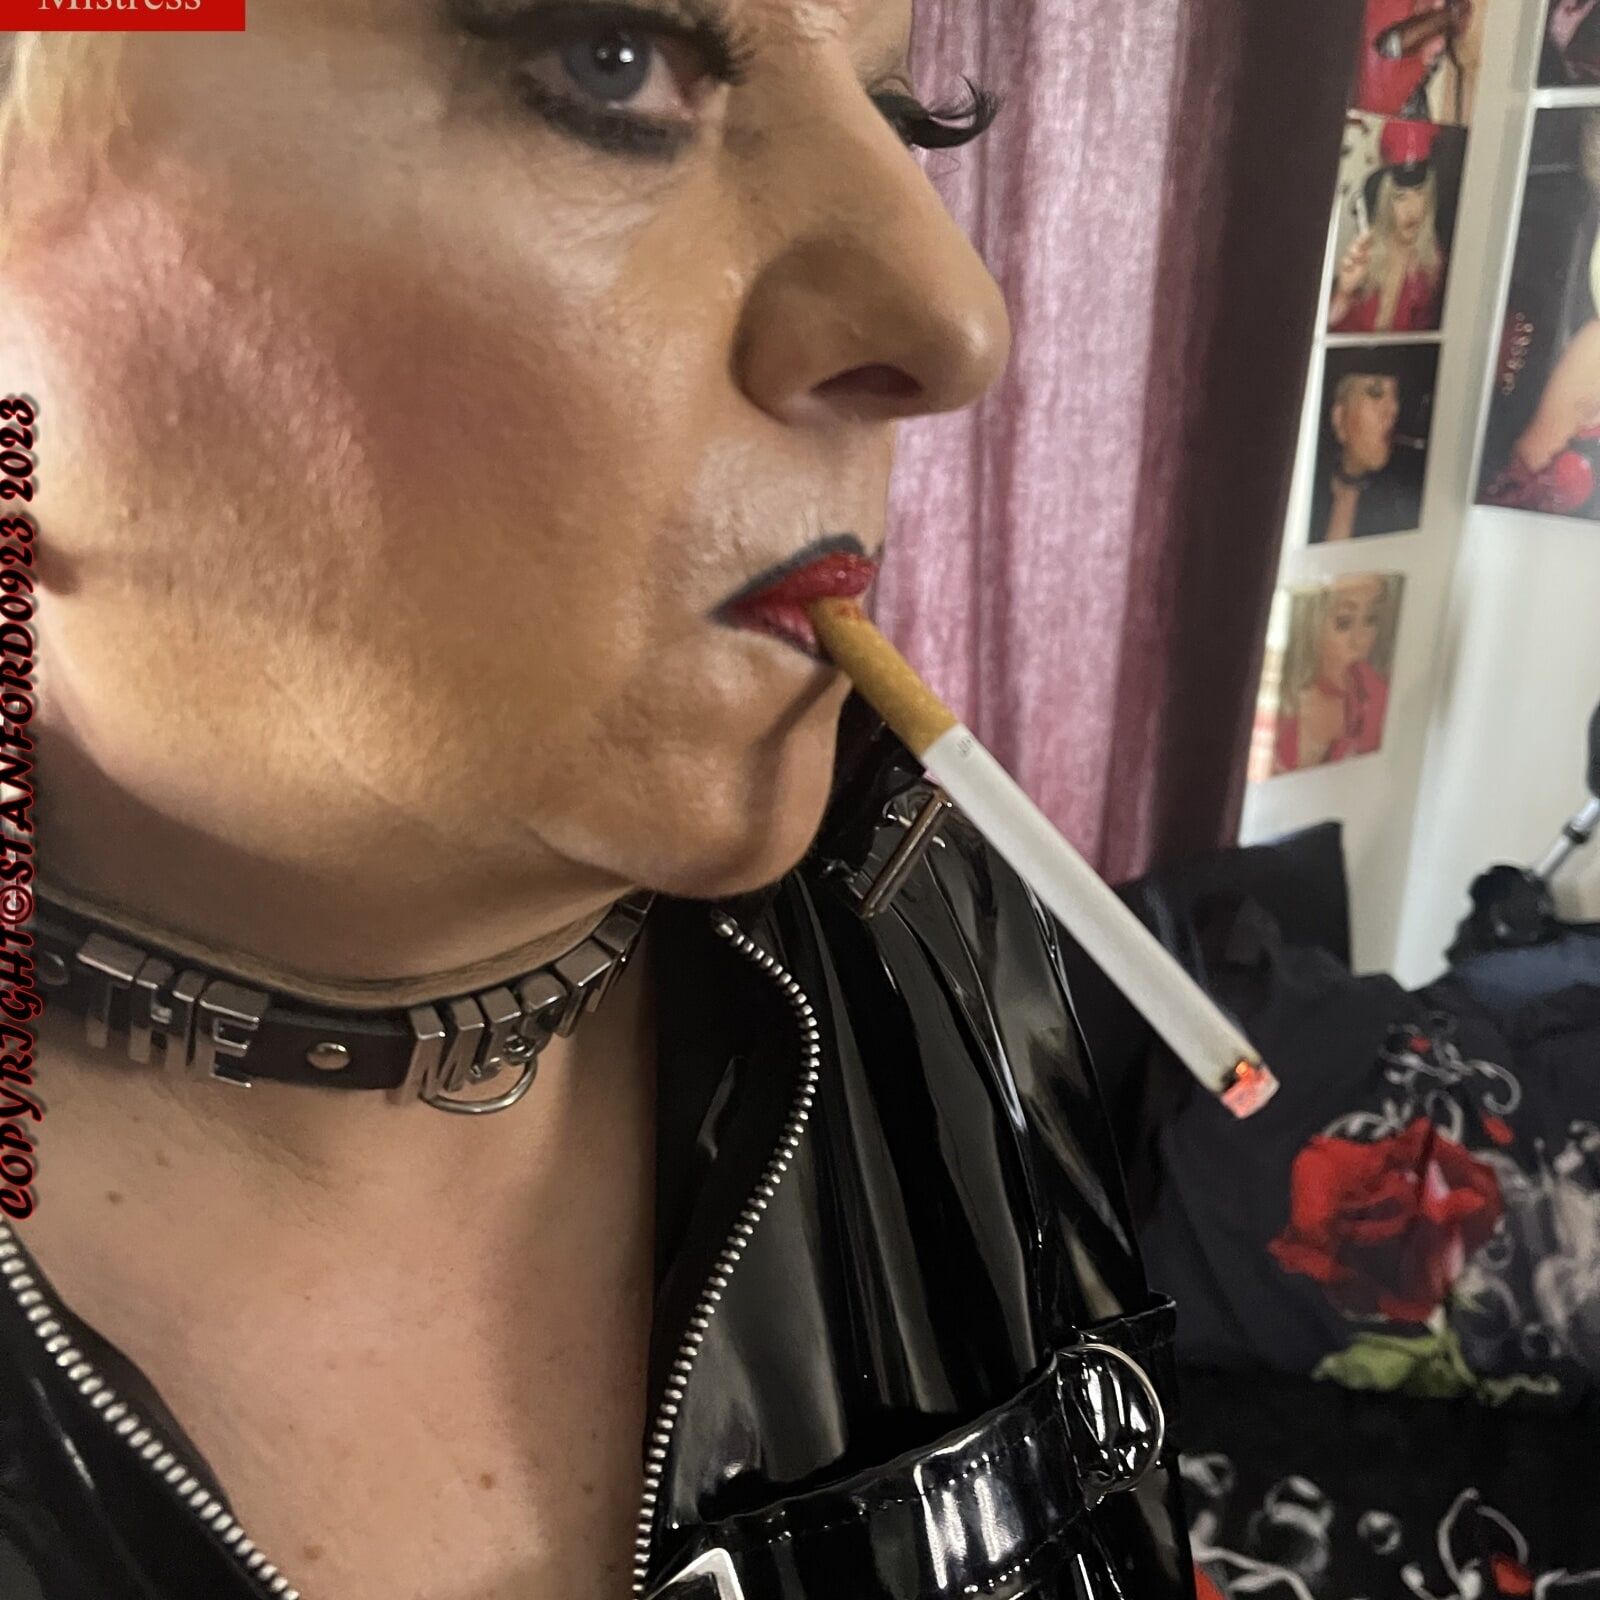 MISTRESS SHIRLEY IS READY SISSY TO FUCK YOU #7